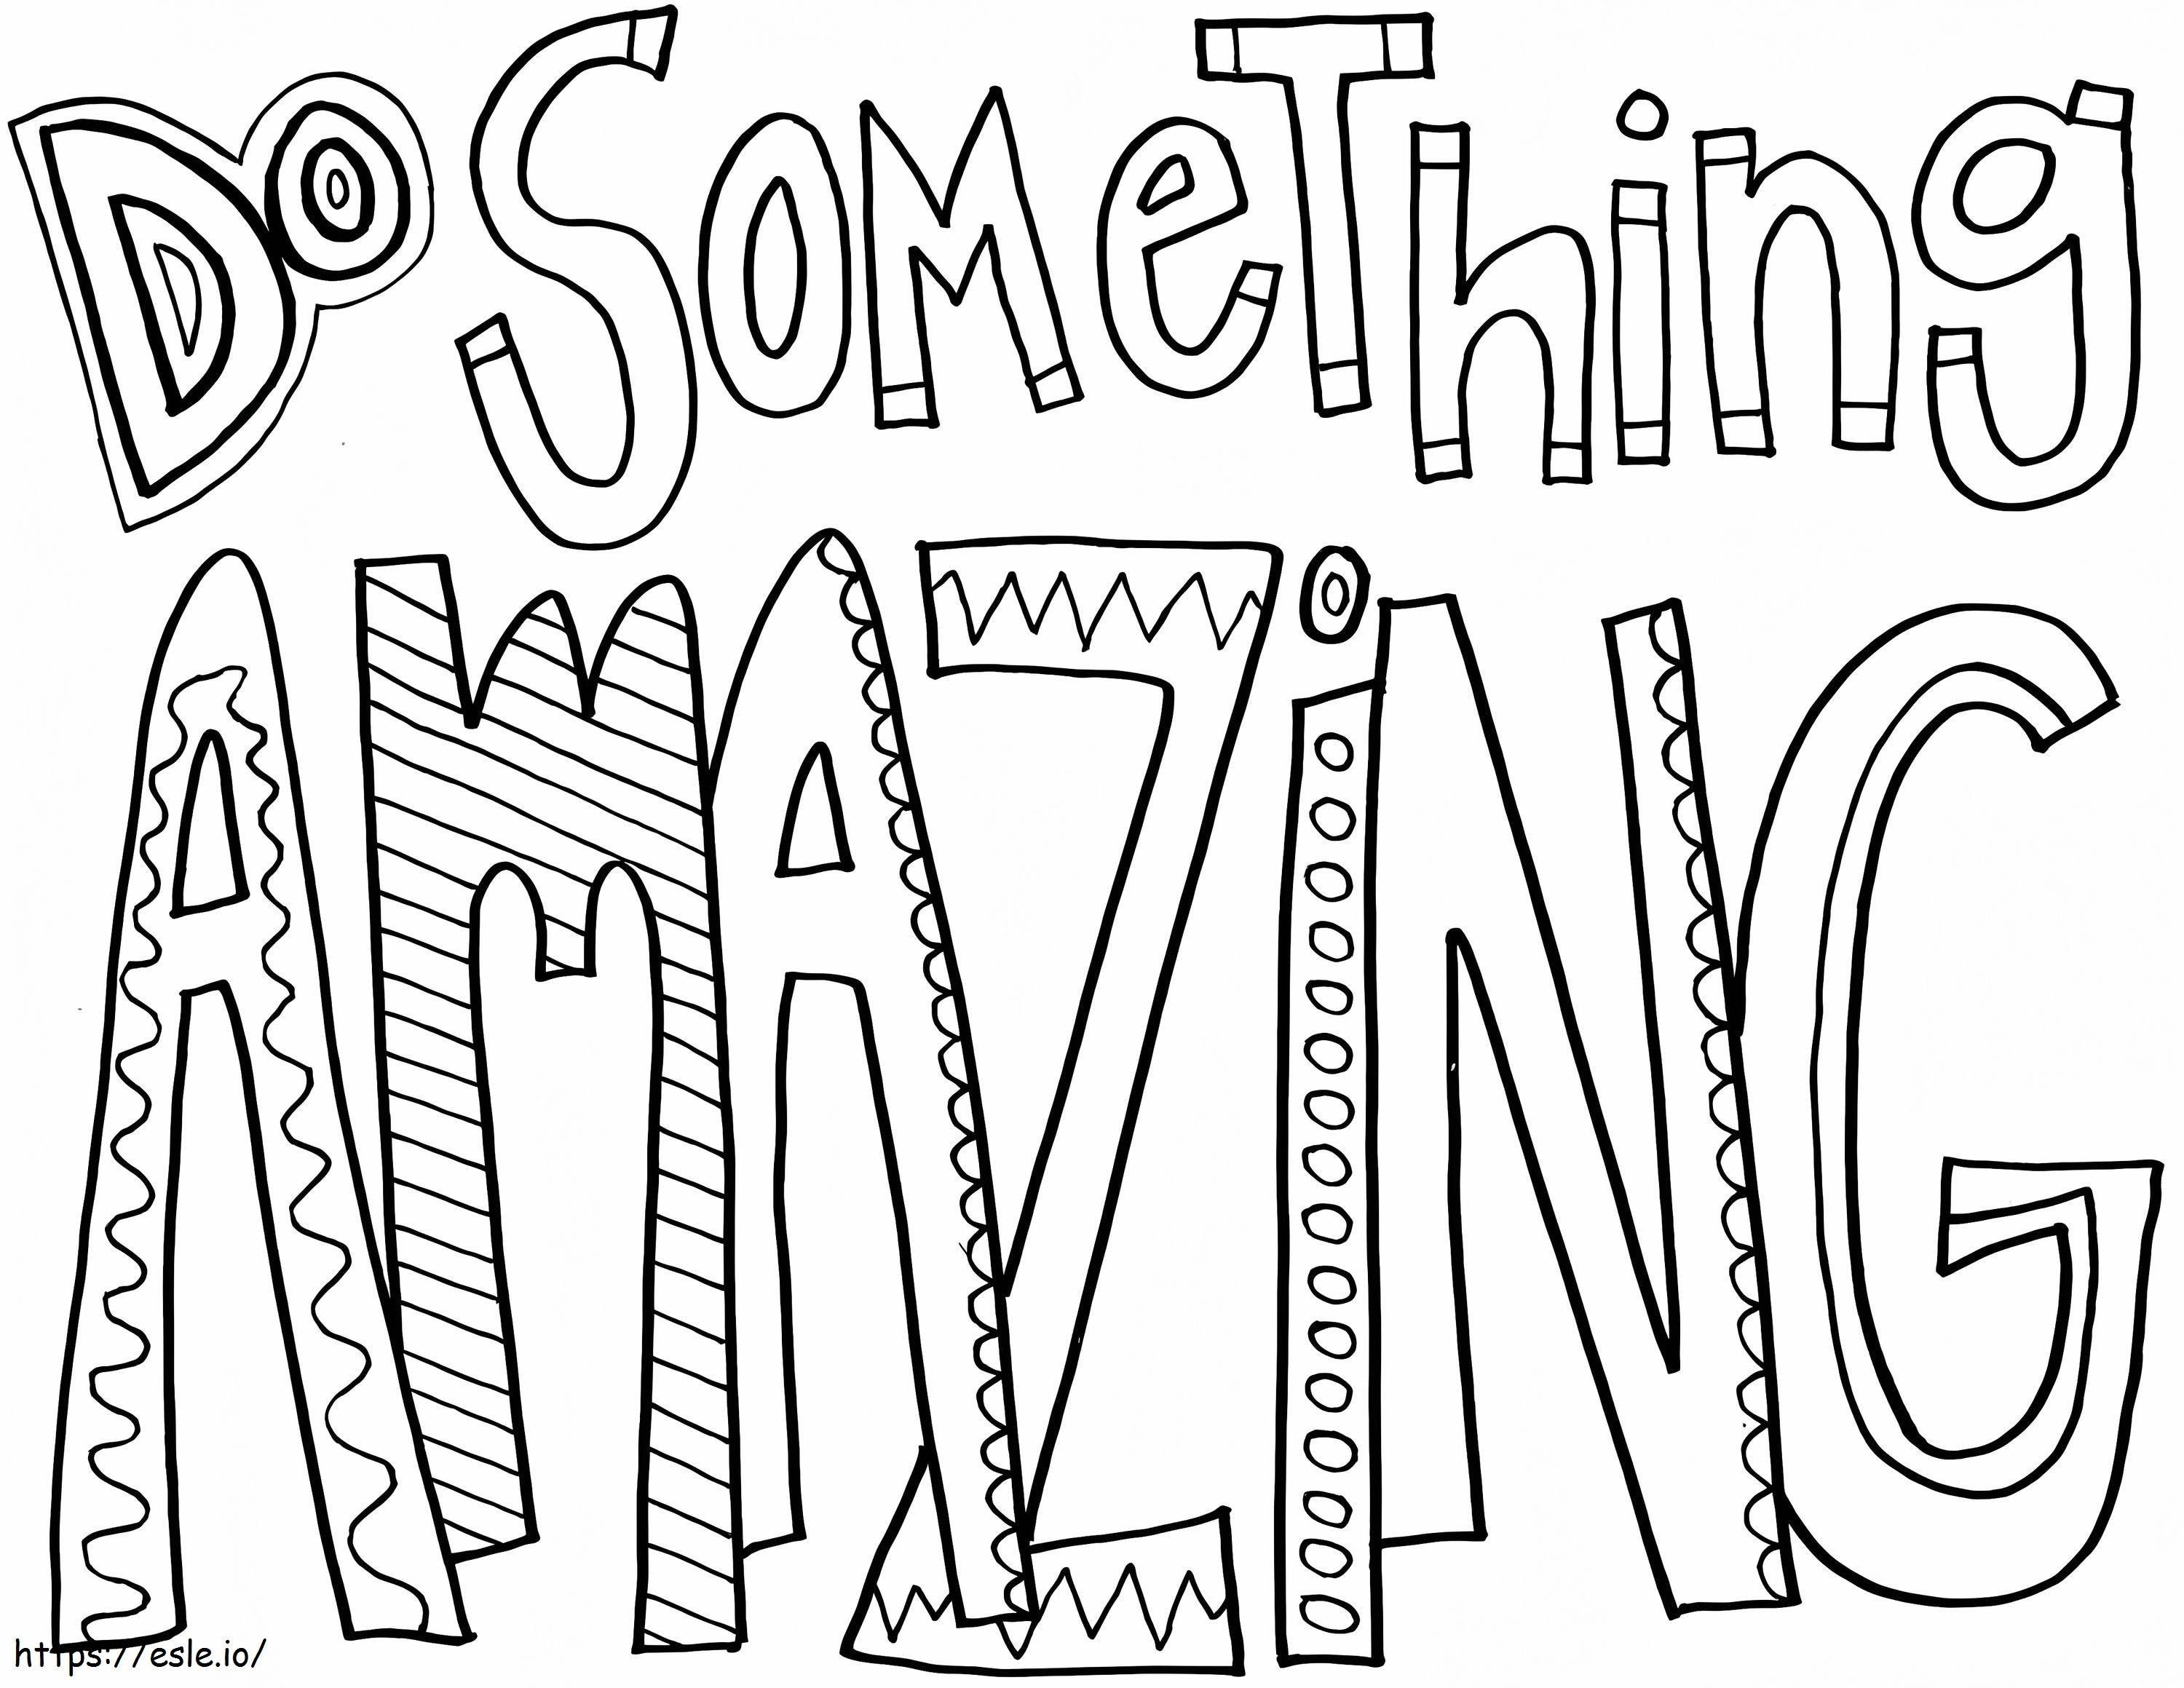 Do Something Amazing coloring page